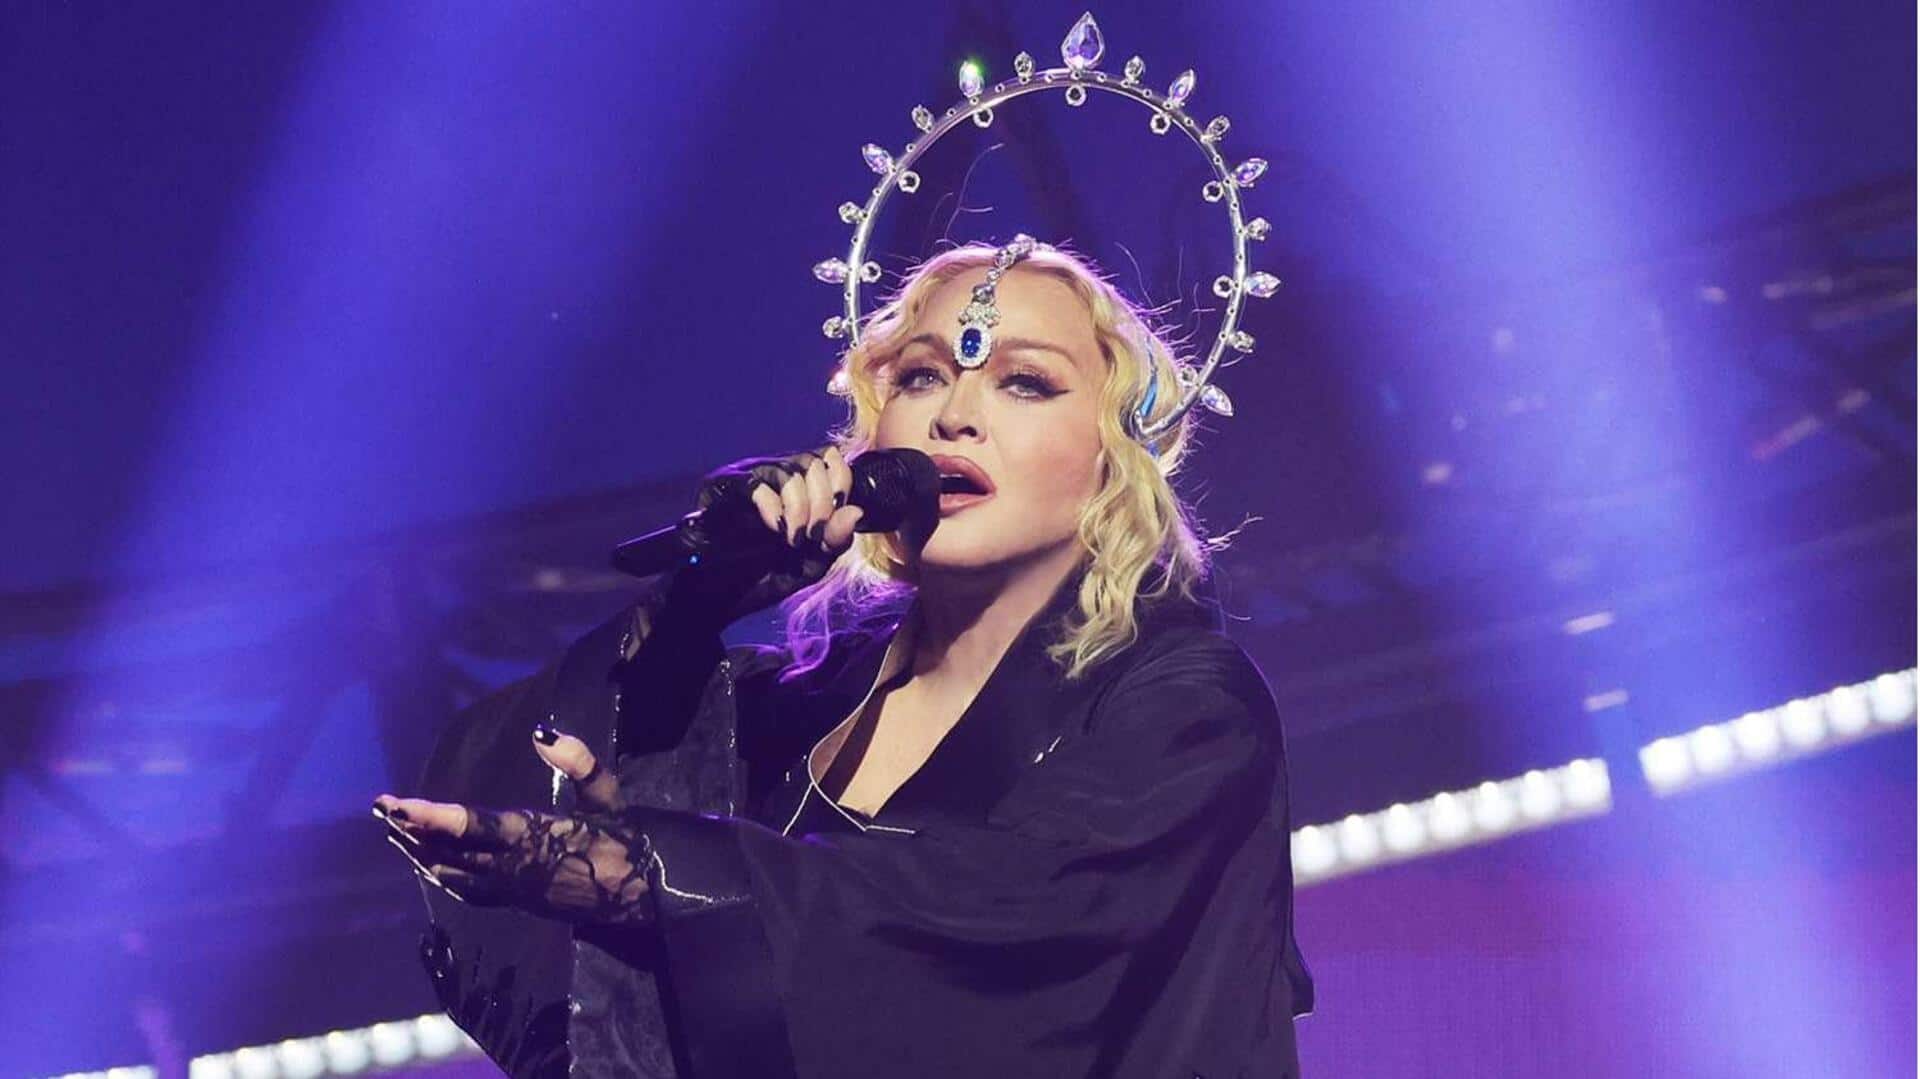 'Spoke to God': Madonna shares stirring account of near-death moment